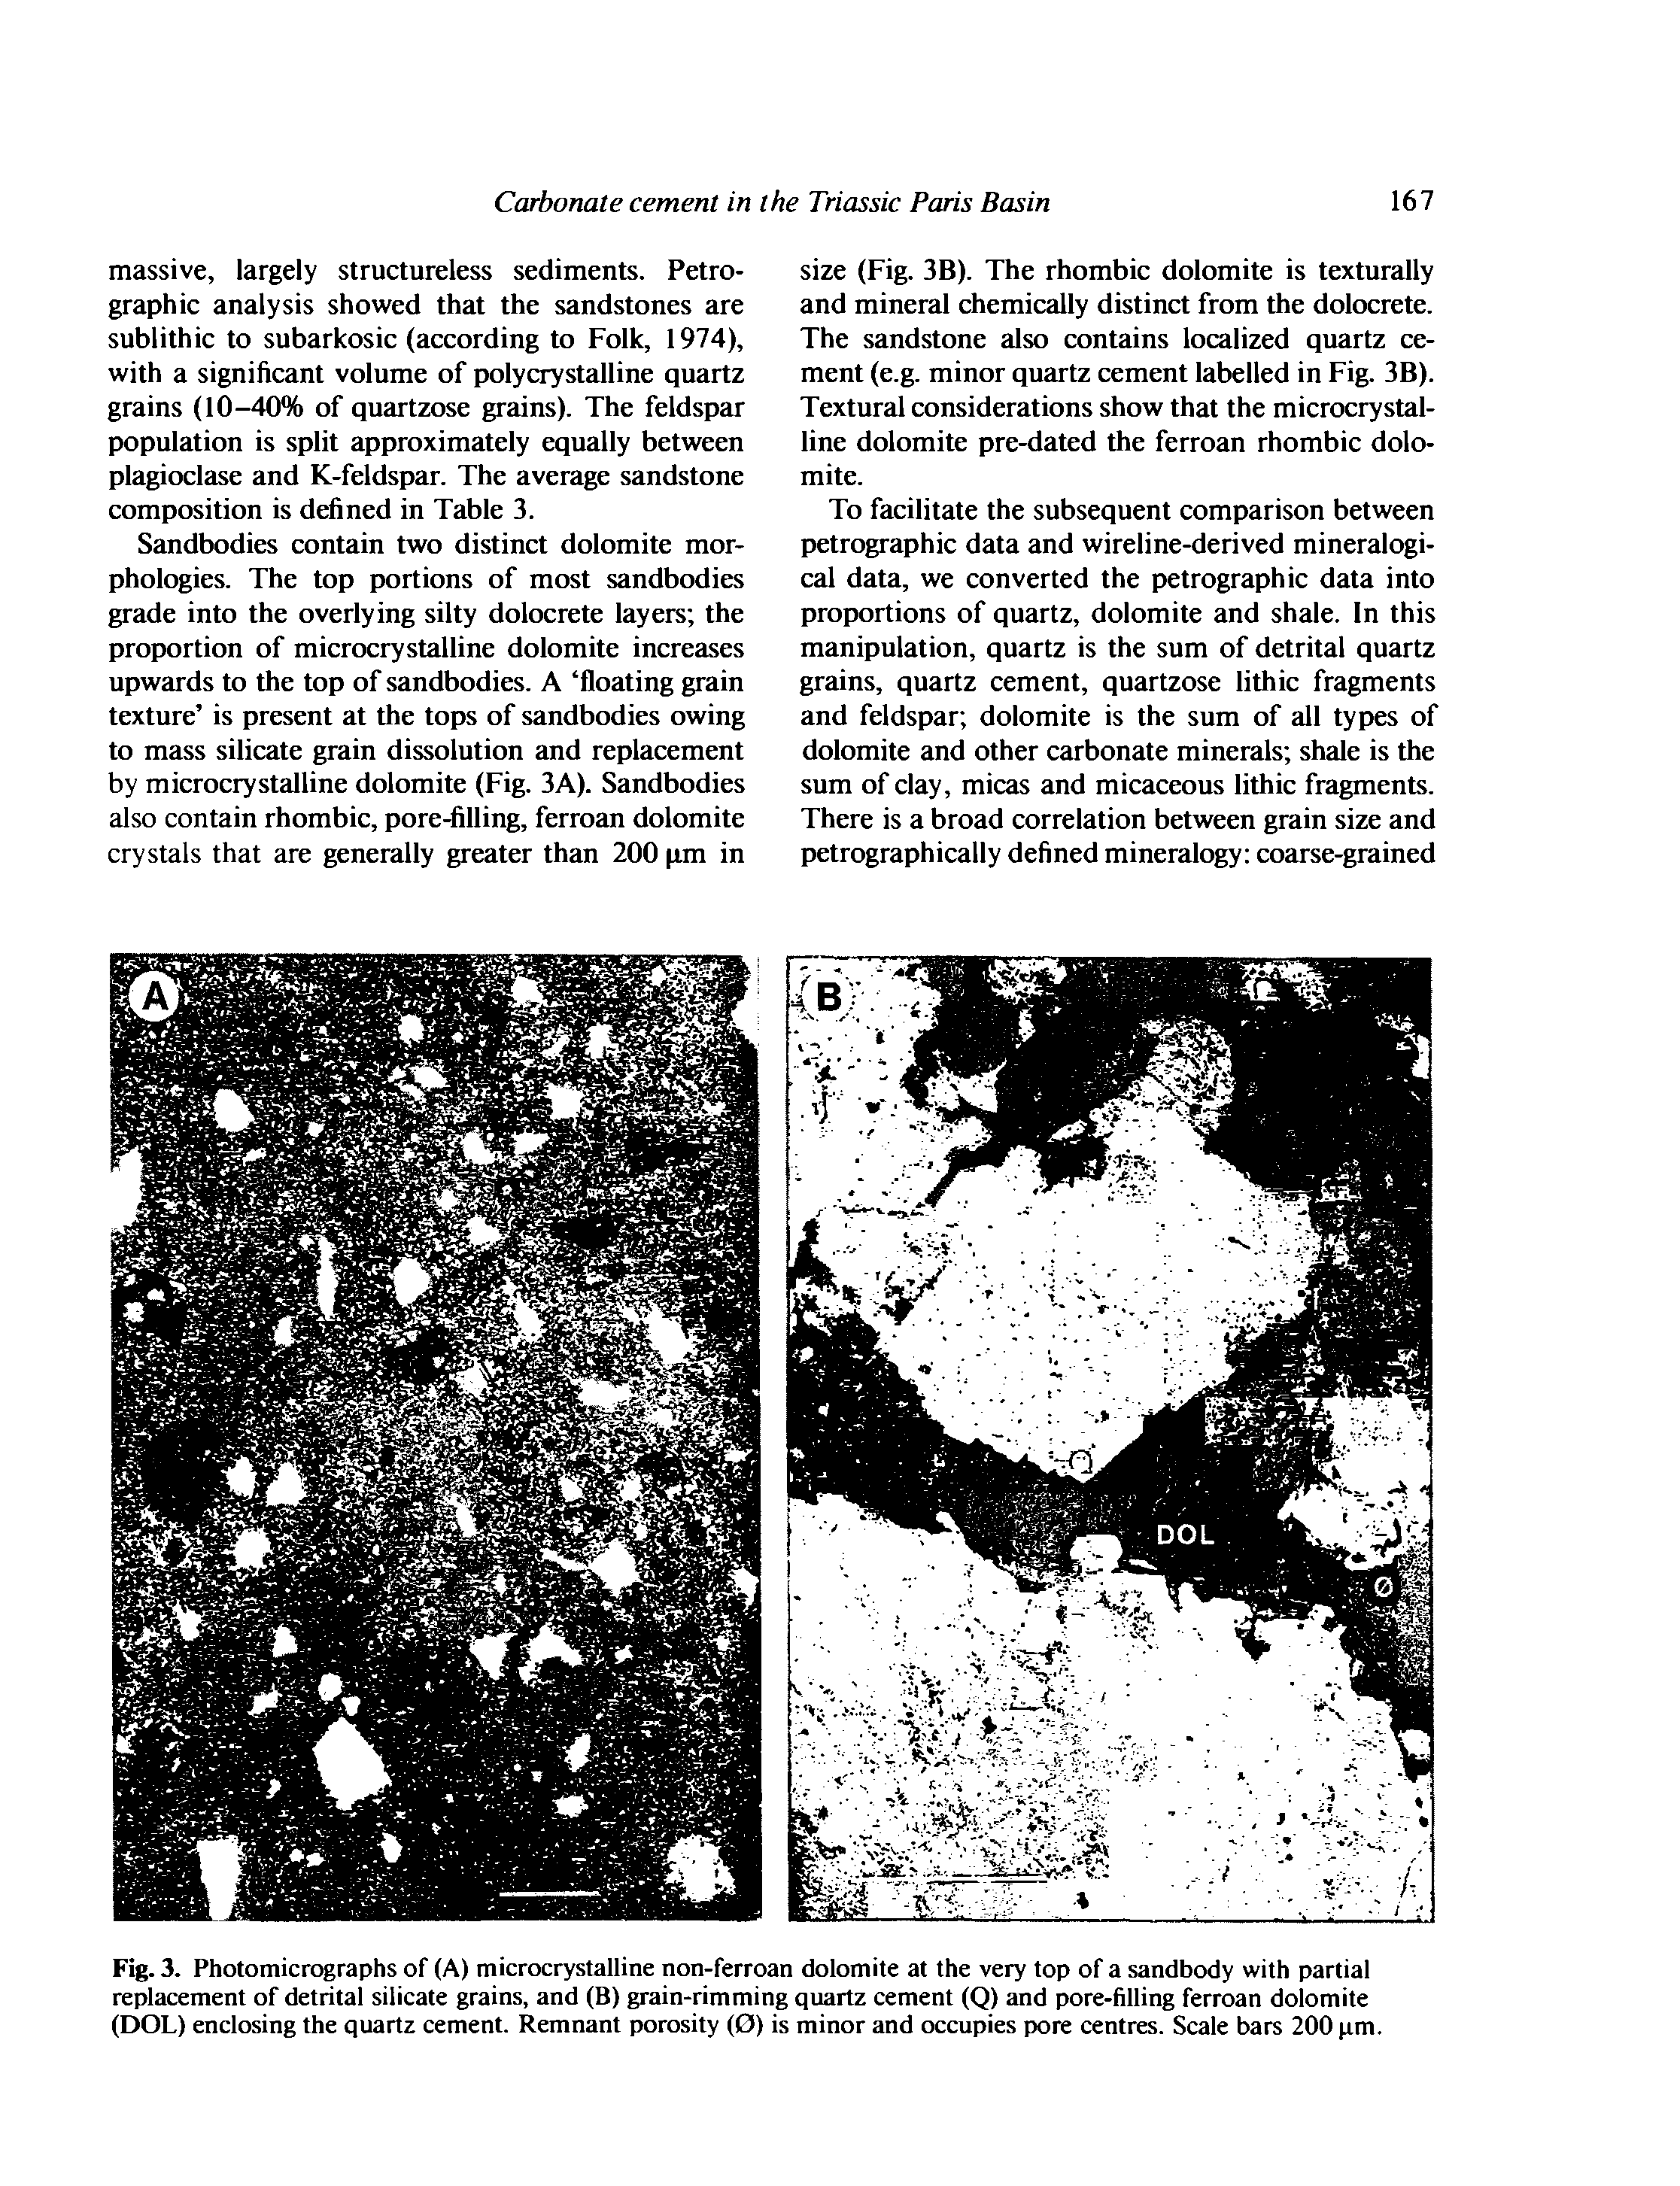 Fig. 3. Photomicrographs of (A) microcrystalline non-ferroan dolomite at the very top of a sandbody with partial replacement of detrital silicate grains, and (B) grain-rimming quartz cement (Q) and pore-filling ferroan dolomite (DOL) enclosing the quartz cement. Remnant porosity (0) is minor and occupies pore centres. Scale bars 200 pm.